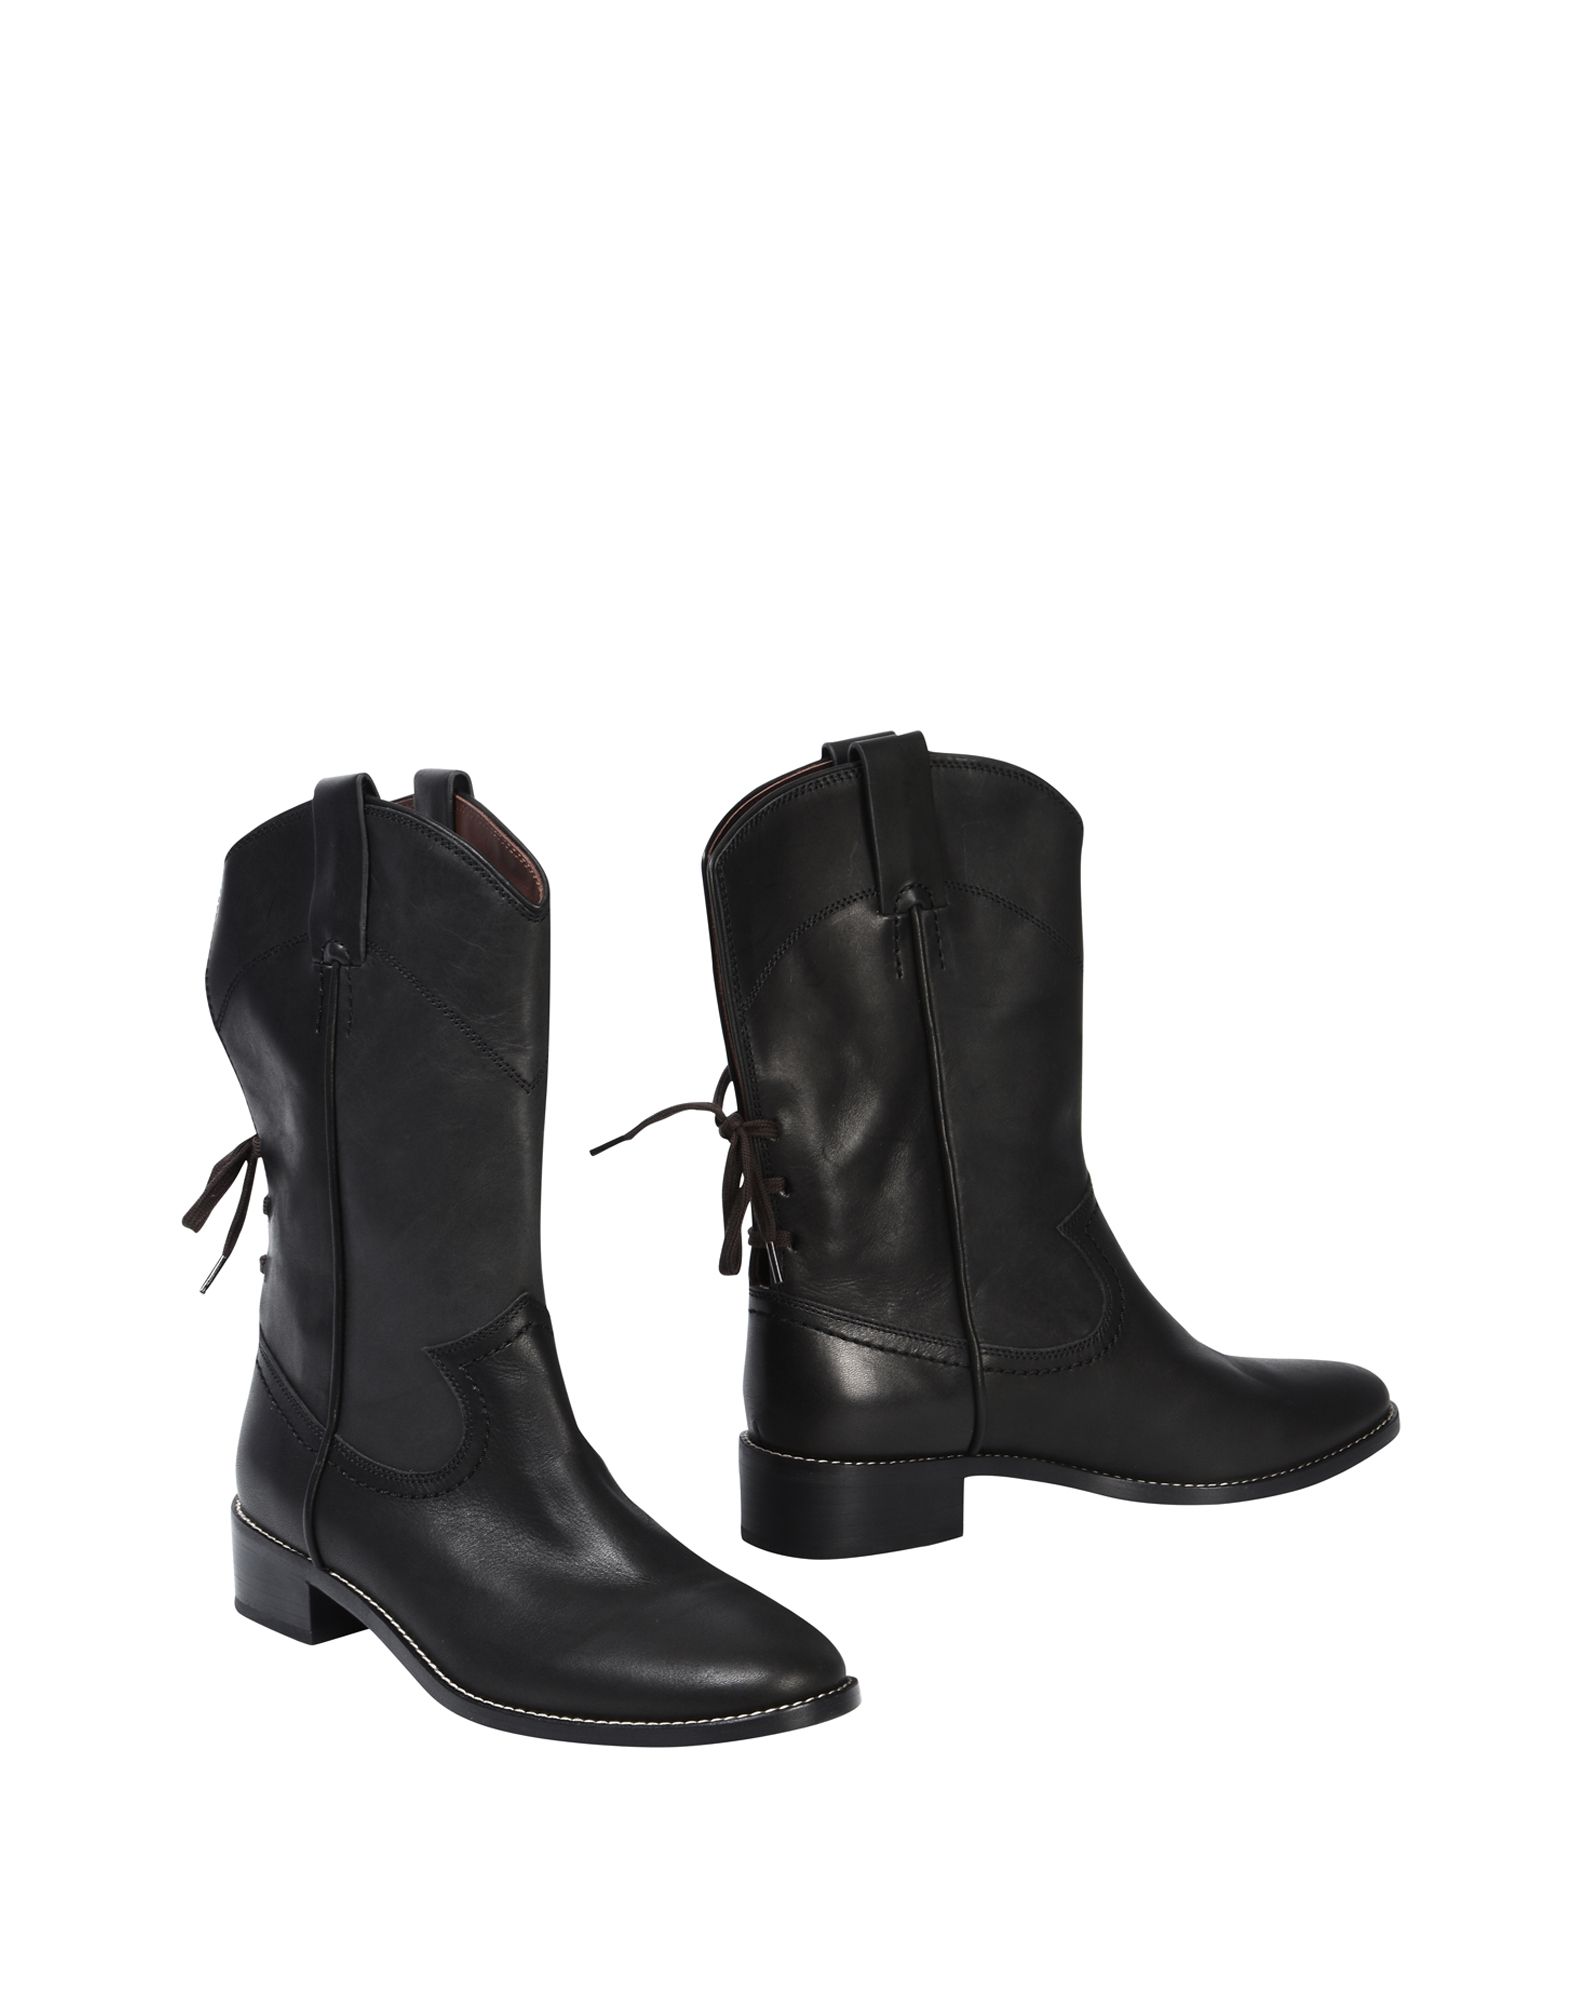 SEE BY CHLOÉ ANKLE BOOTS,11511269BS 6